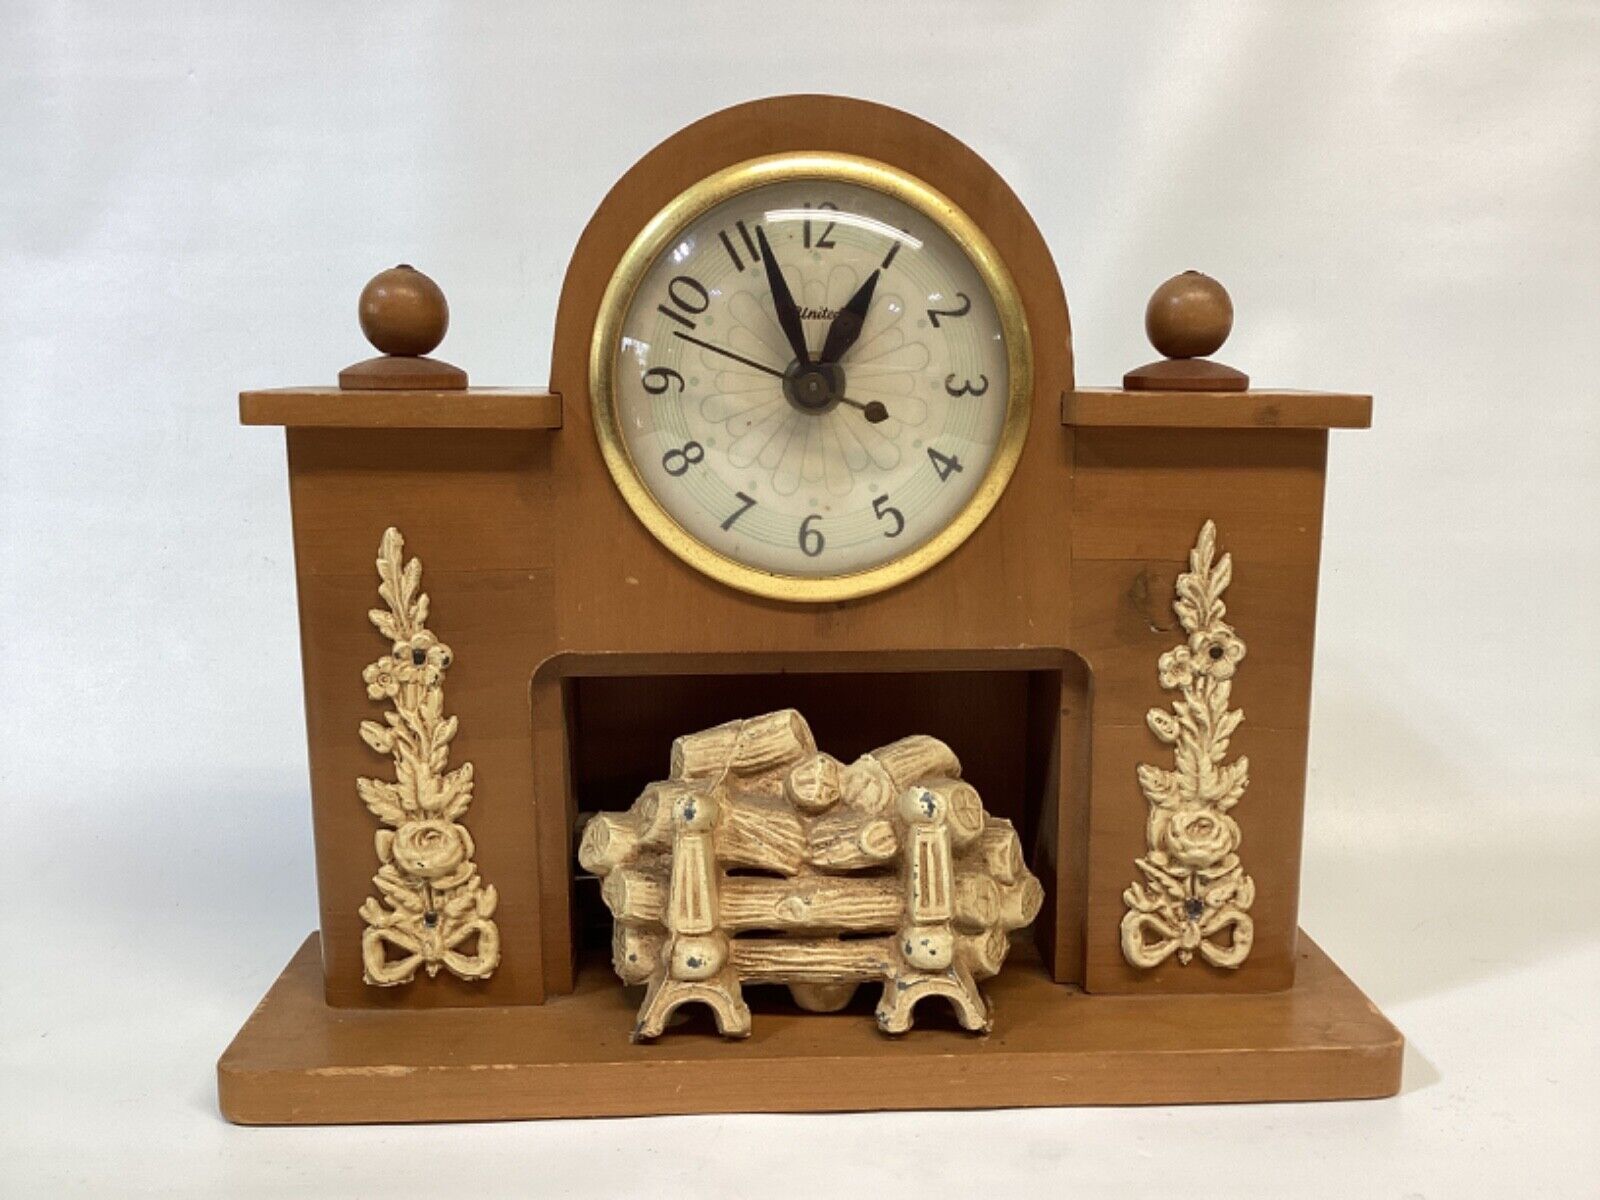 United Clock Corp.  Vintage Fireplace Clock. Model 419.  Working